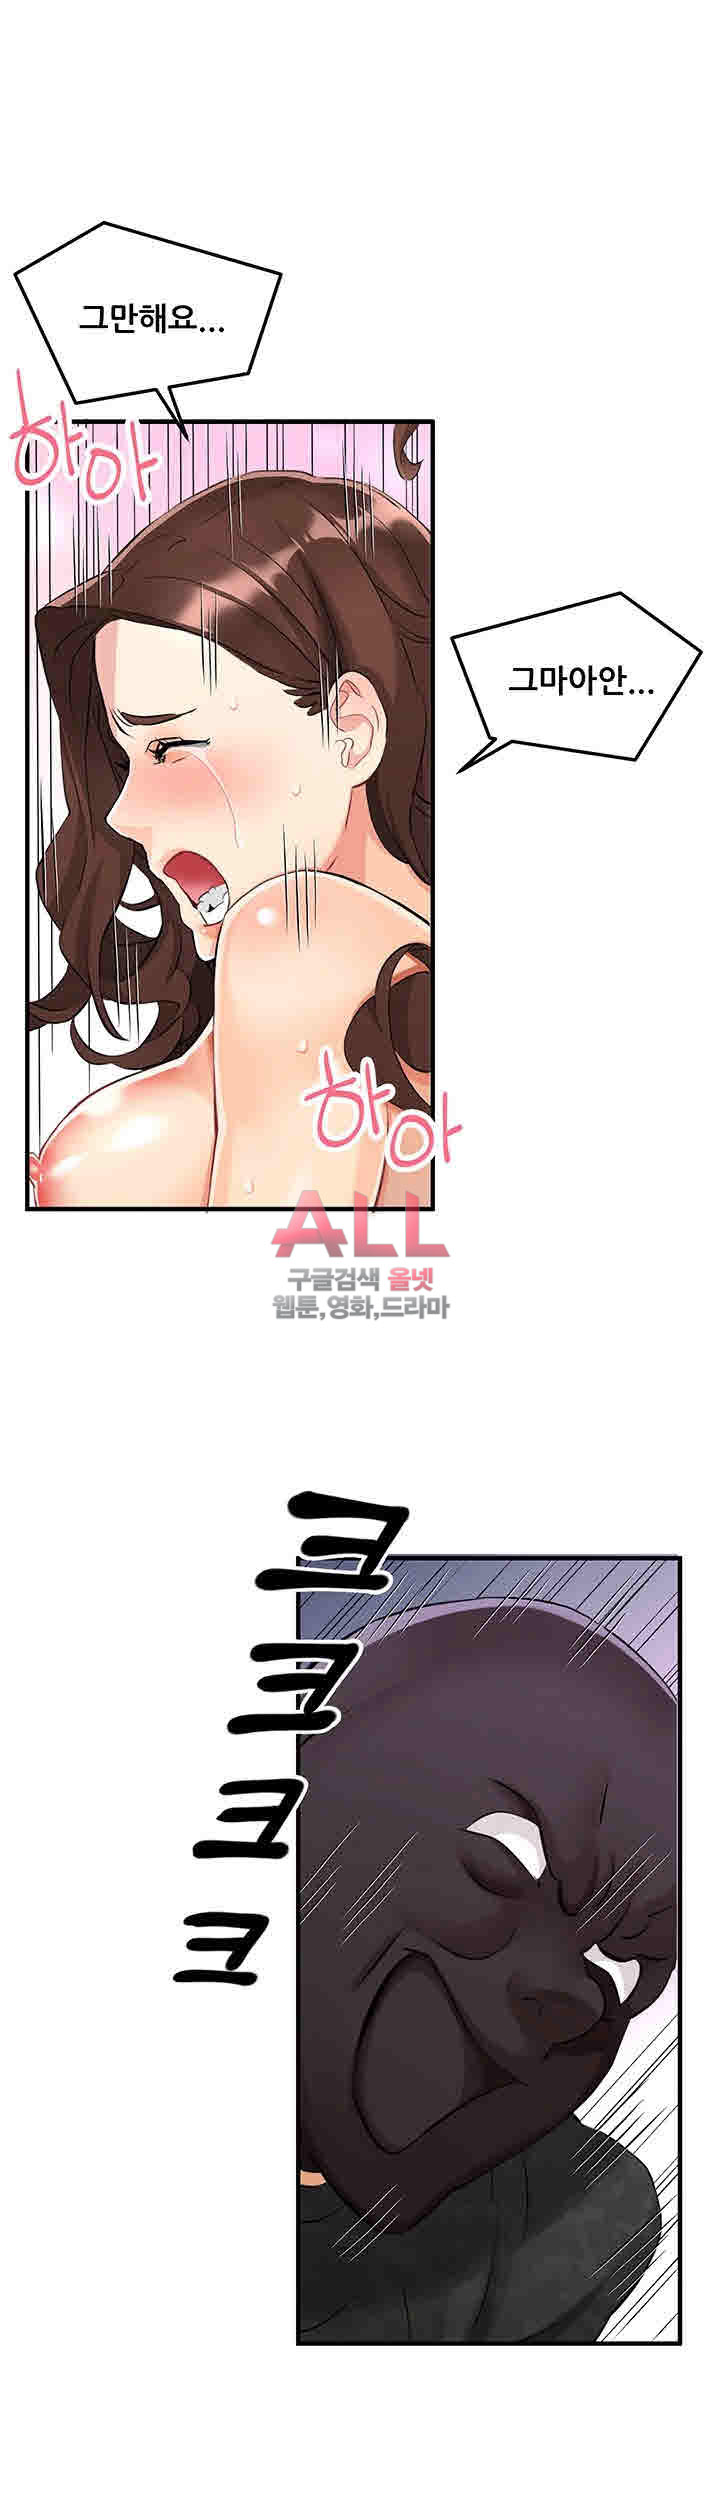 Secret Private Life Raw - Chapter 1 Page 36